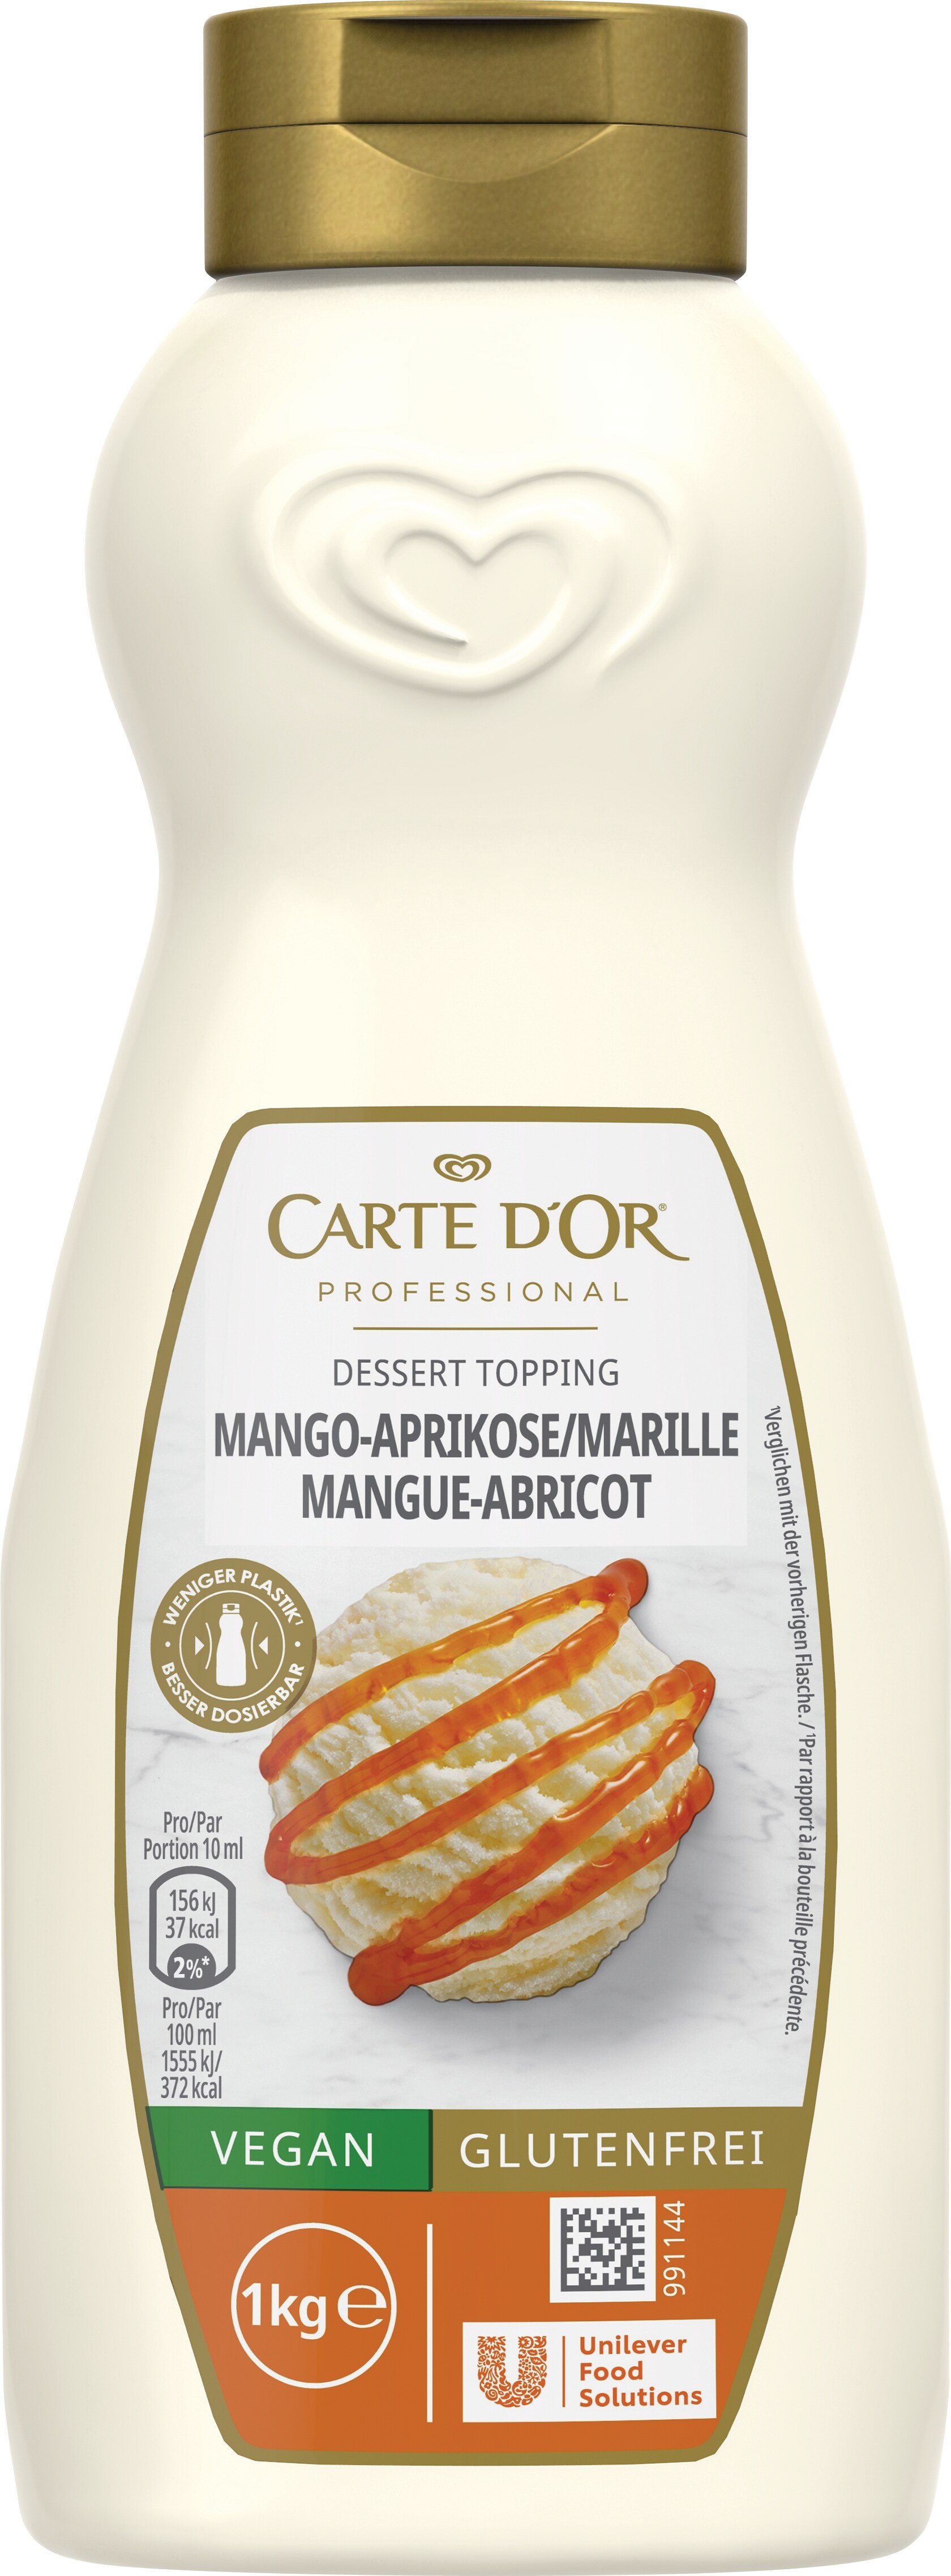 Carte D'or 3PM CUC Topping Mango Apricot 1 KG - 